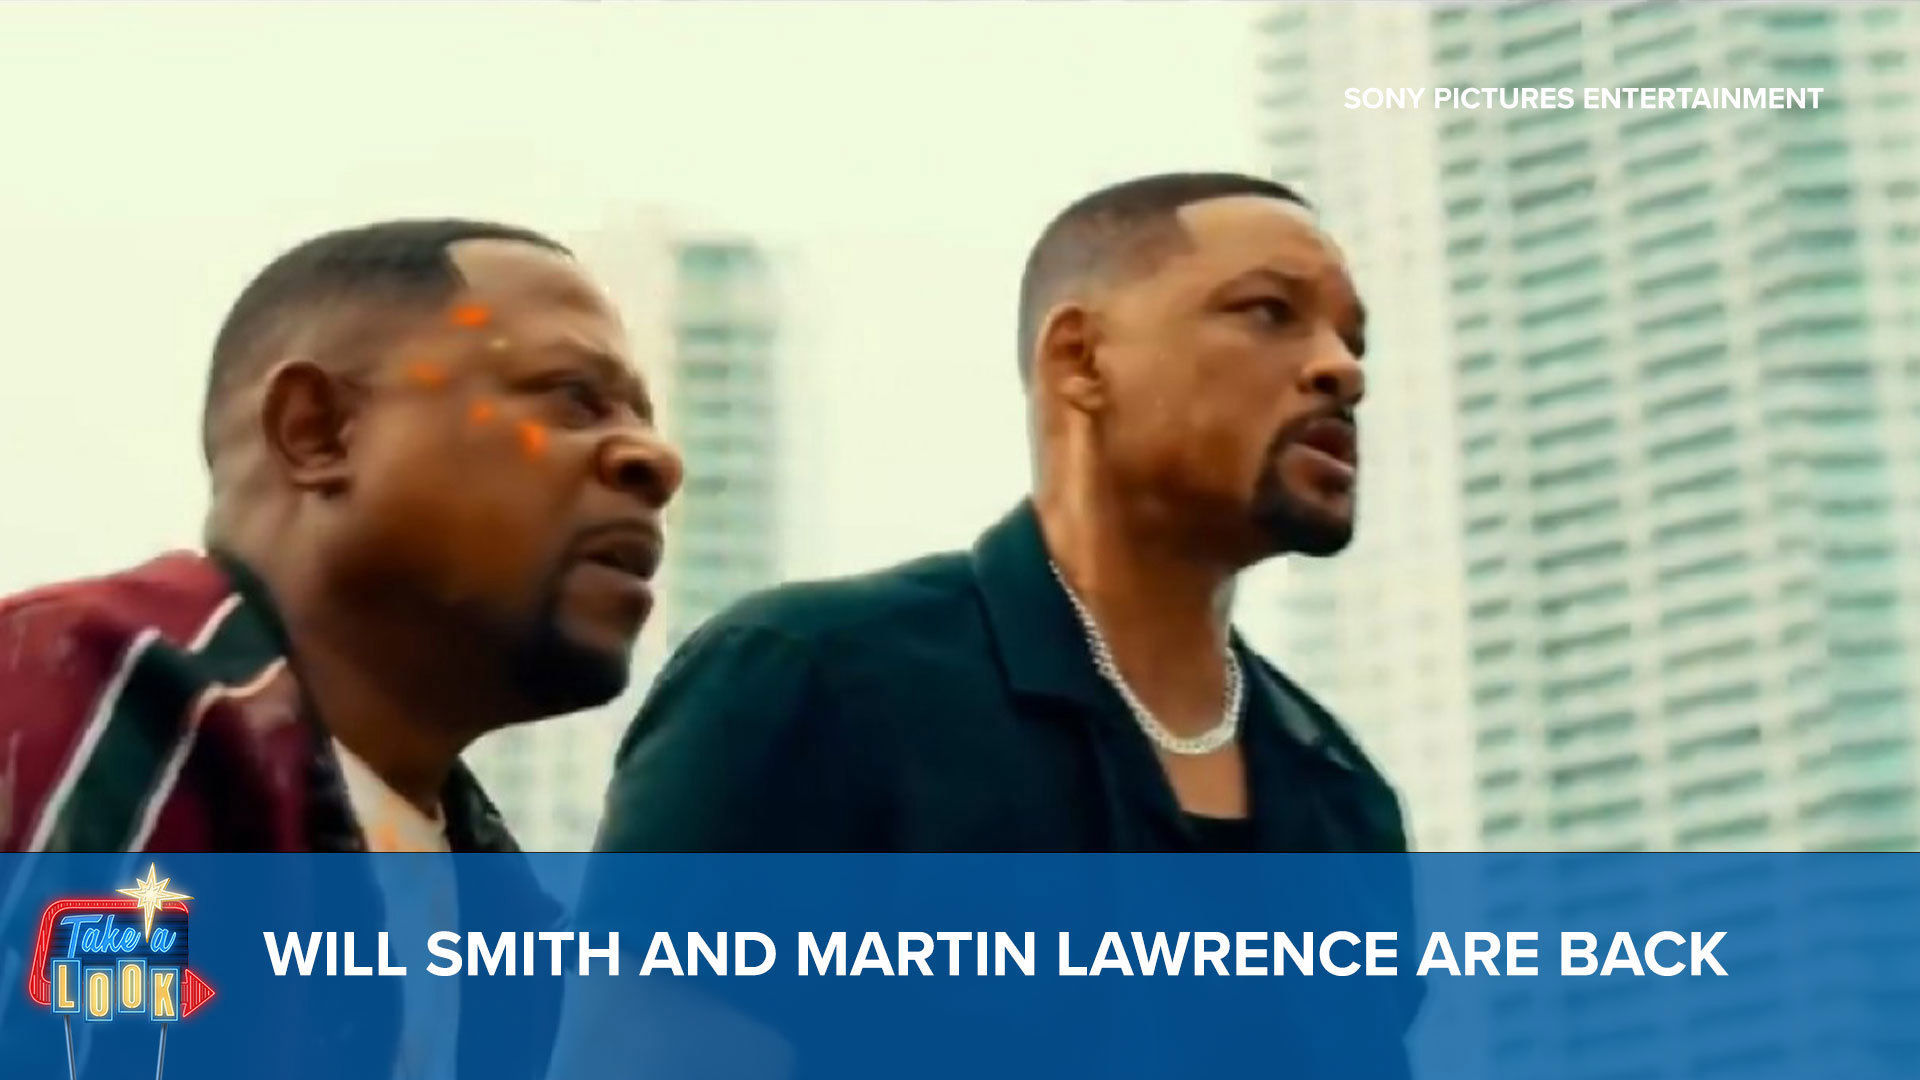 This week on “Take a Look” with Mark S. Allen: Will Smith and Martin Lawrence are back “Bad Boys: Ride or Die.”